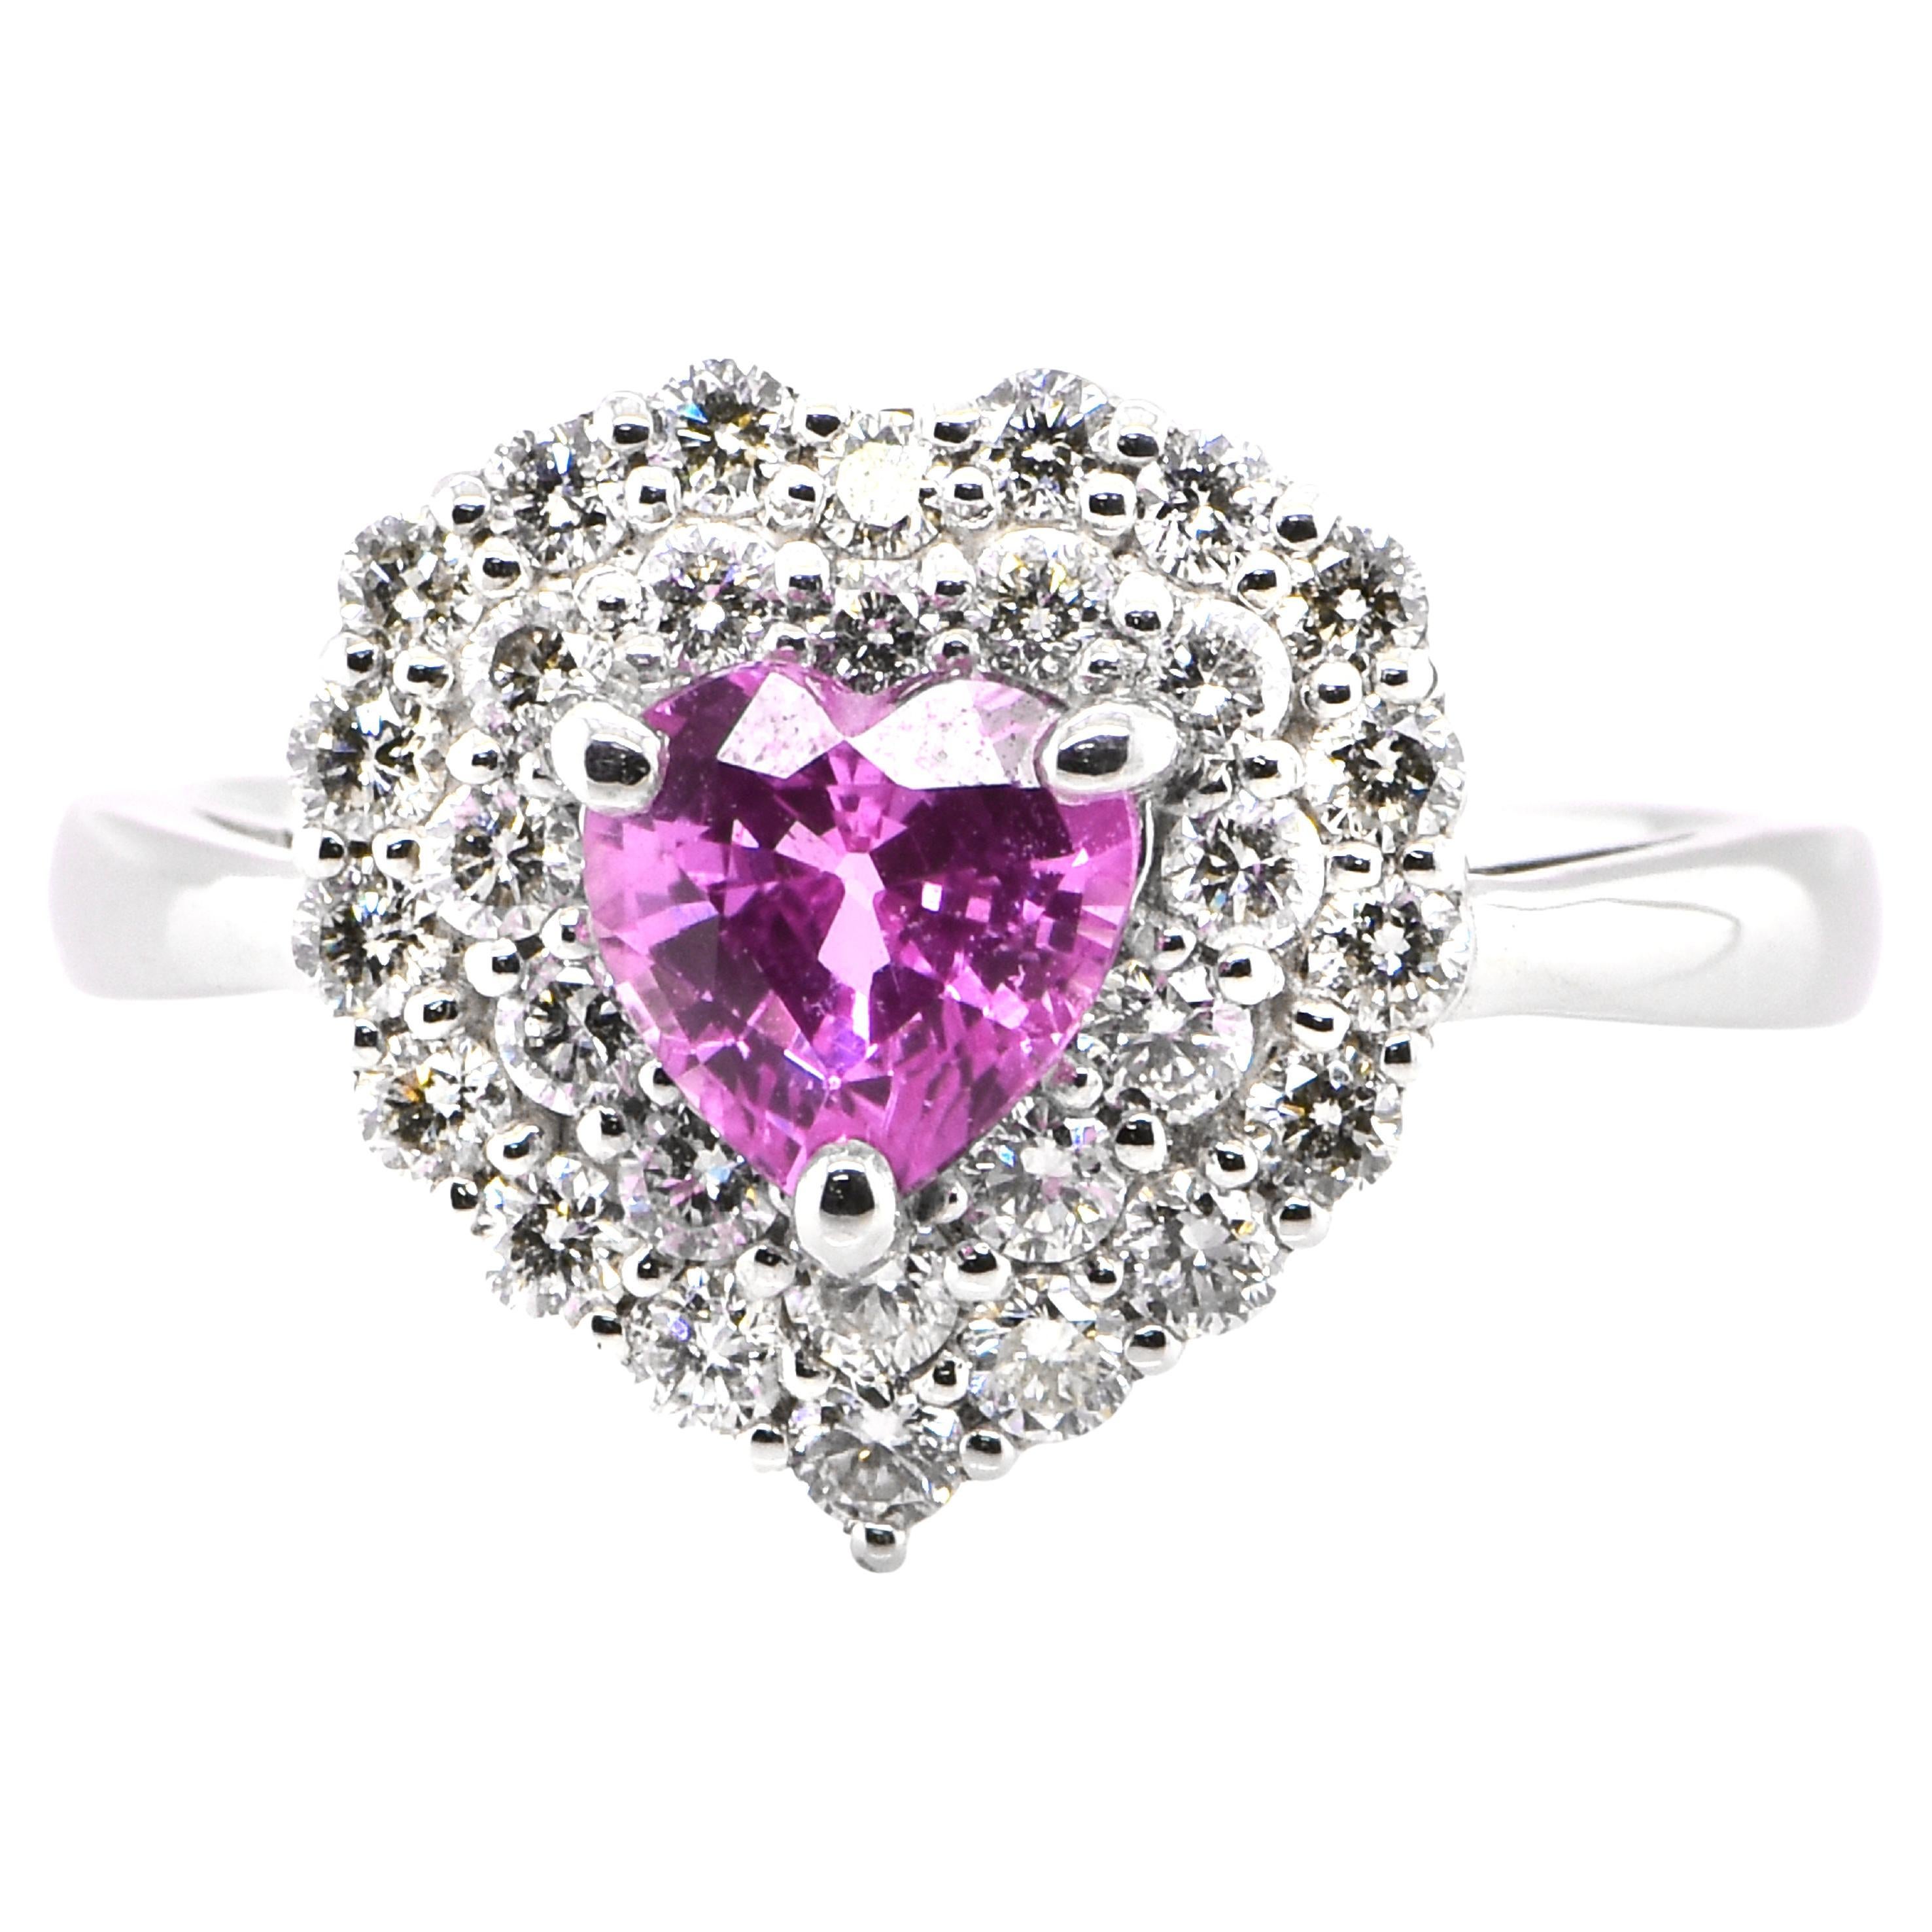 1.06 Carat Heart-Cut Pink Sapphire and Diamond Double-Halo Ring Set in Platinum